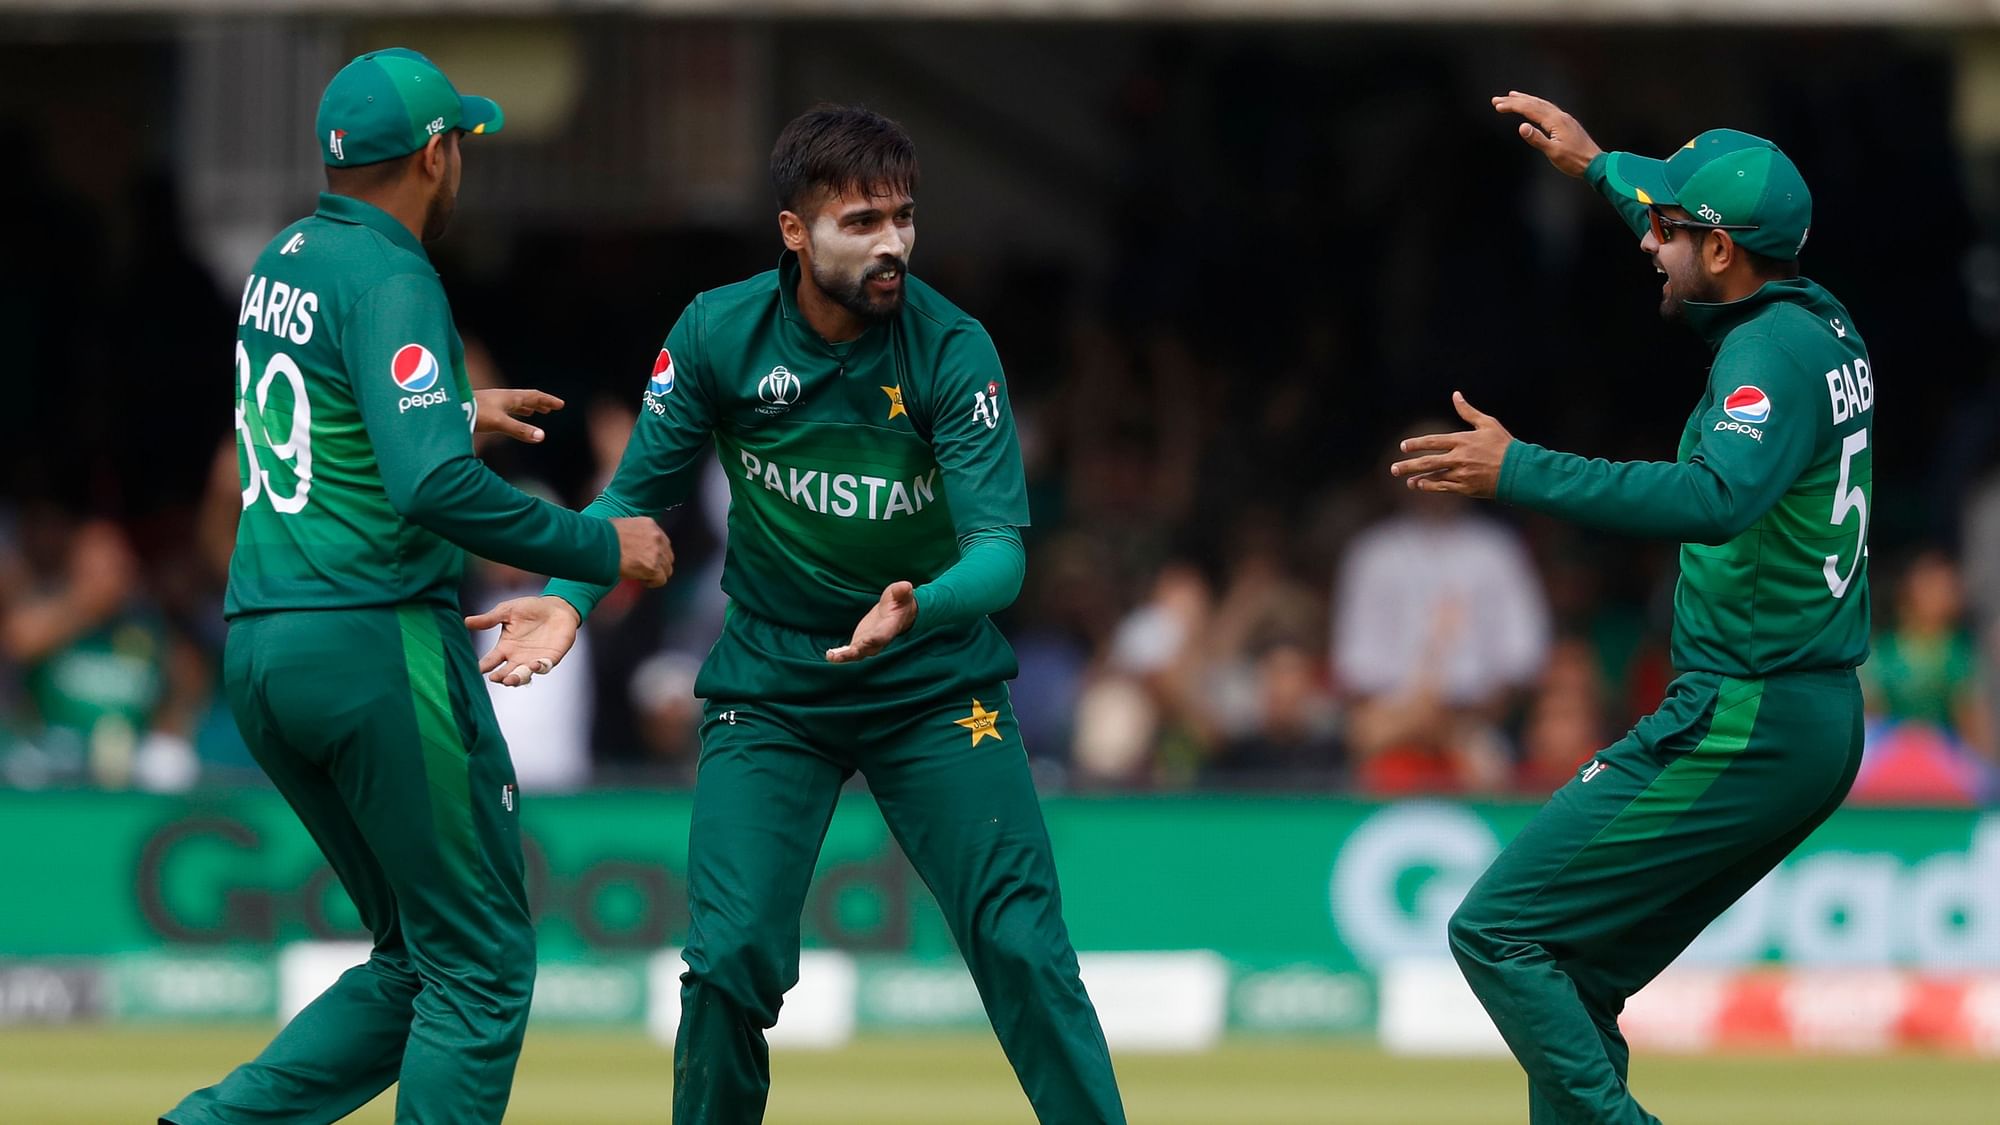 A tweet by the International Cricket Council (ICC) with regard to Pakistan’s chances of making the semifinals of the World Cup has caused a bit of a stir on social media.